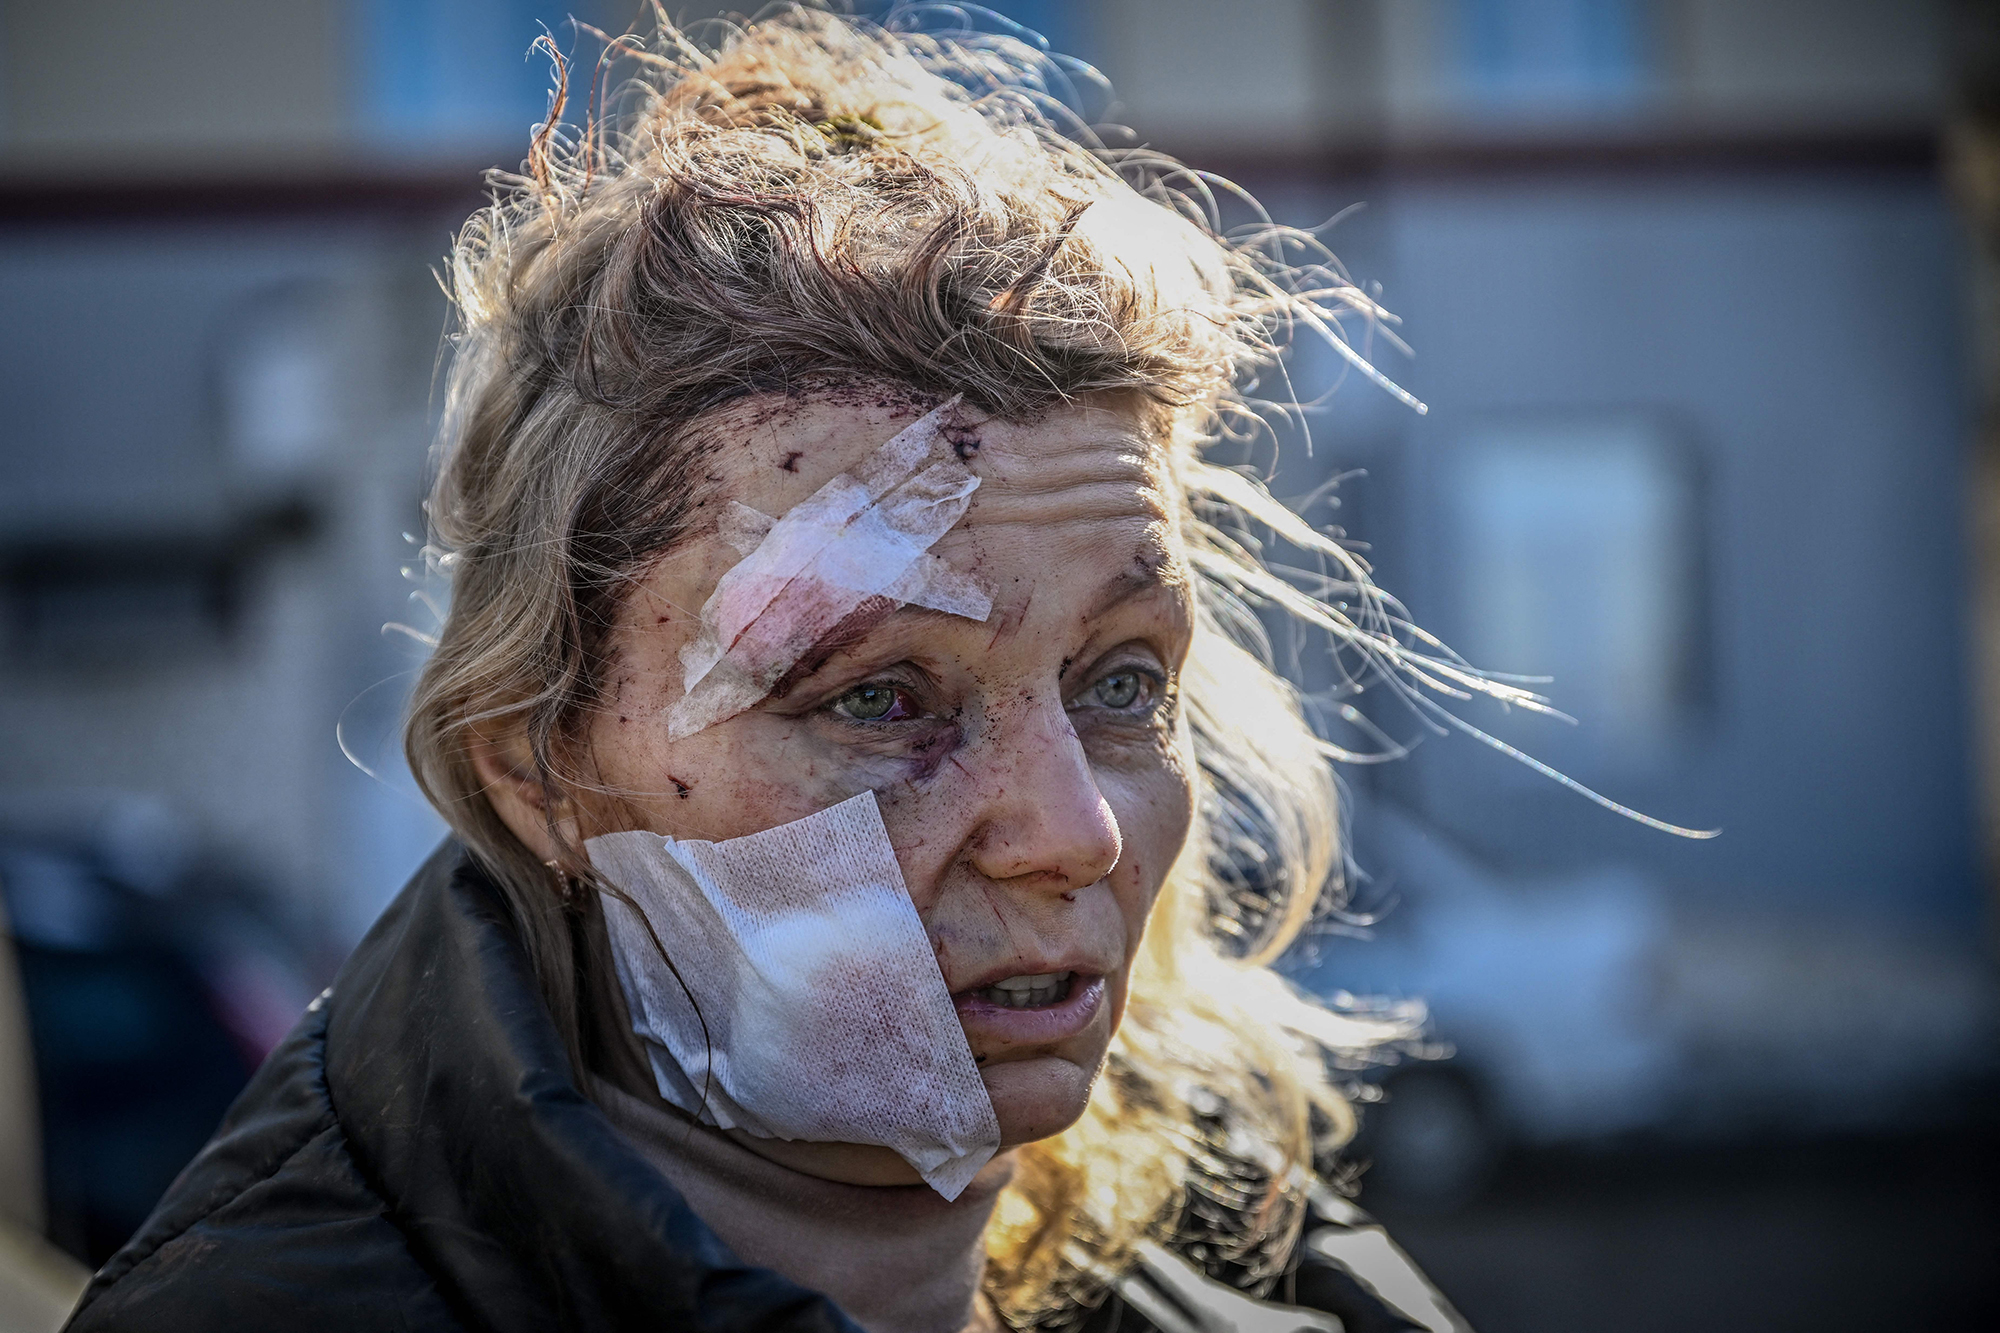 Olena Kurylo, a 52-year-old teacher, stands outside a hospital after the February 24 bombing of the town of Chuguiv in eastern Ukraine.